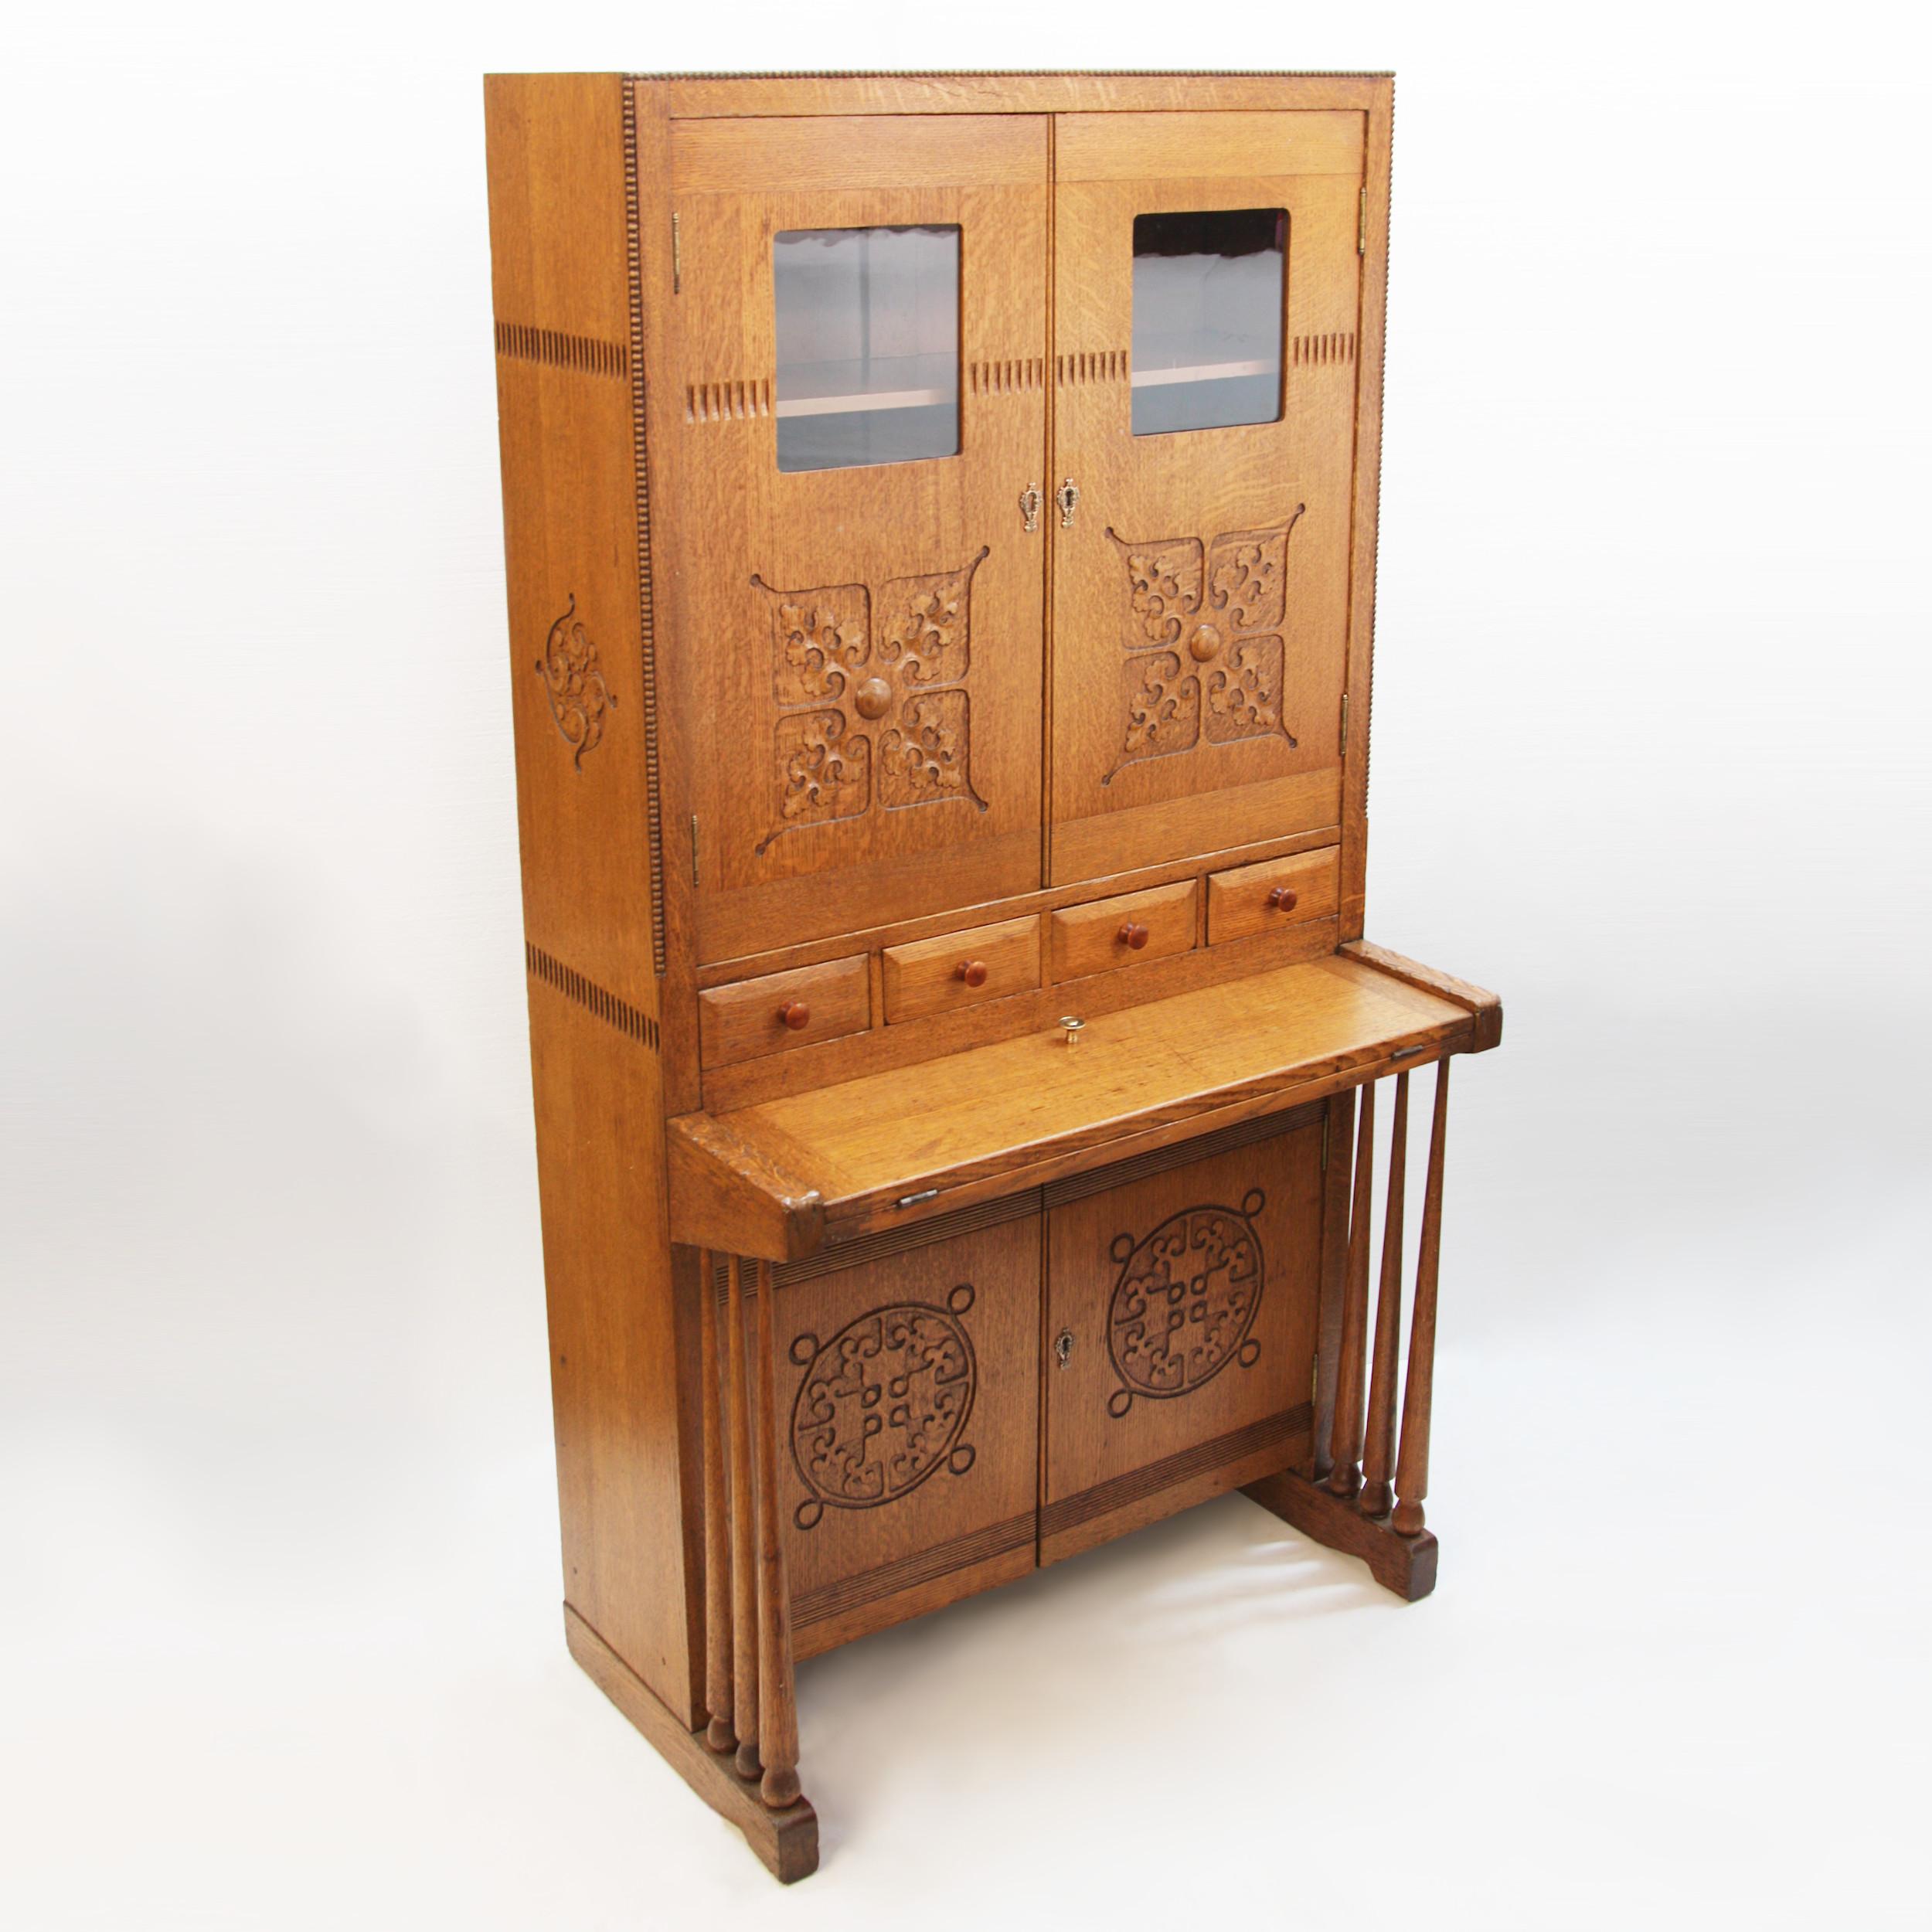 Very unusual Arts & Crafts drop-front secretary desk made in the early 20th century. Desk cabinet features solid quarter-sawn oak construction, dovetailed drawers, uniquely stylized carved motifs/details, and a distinctively transitional style. This